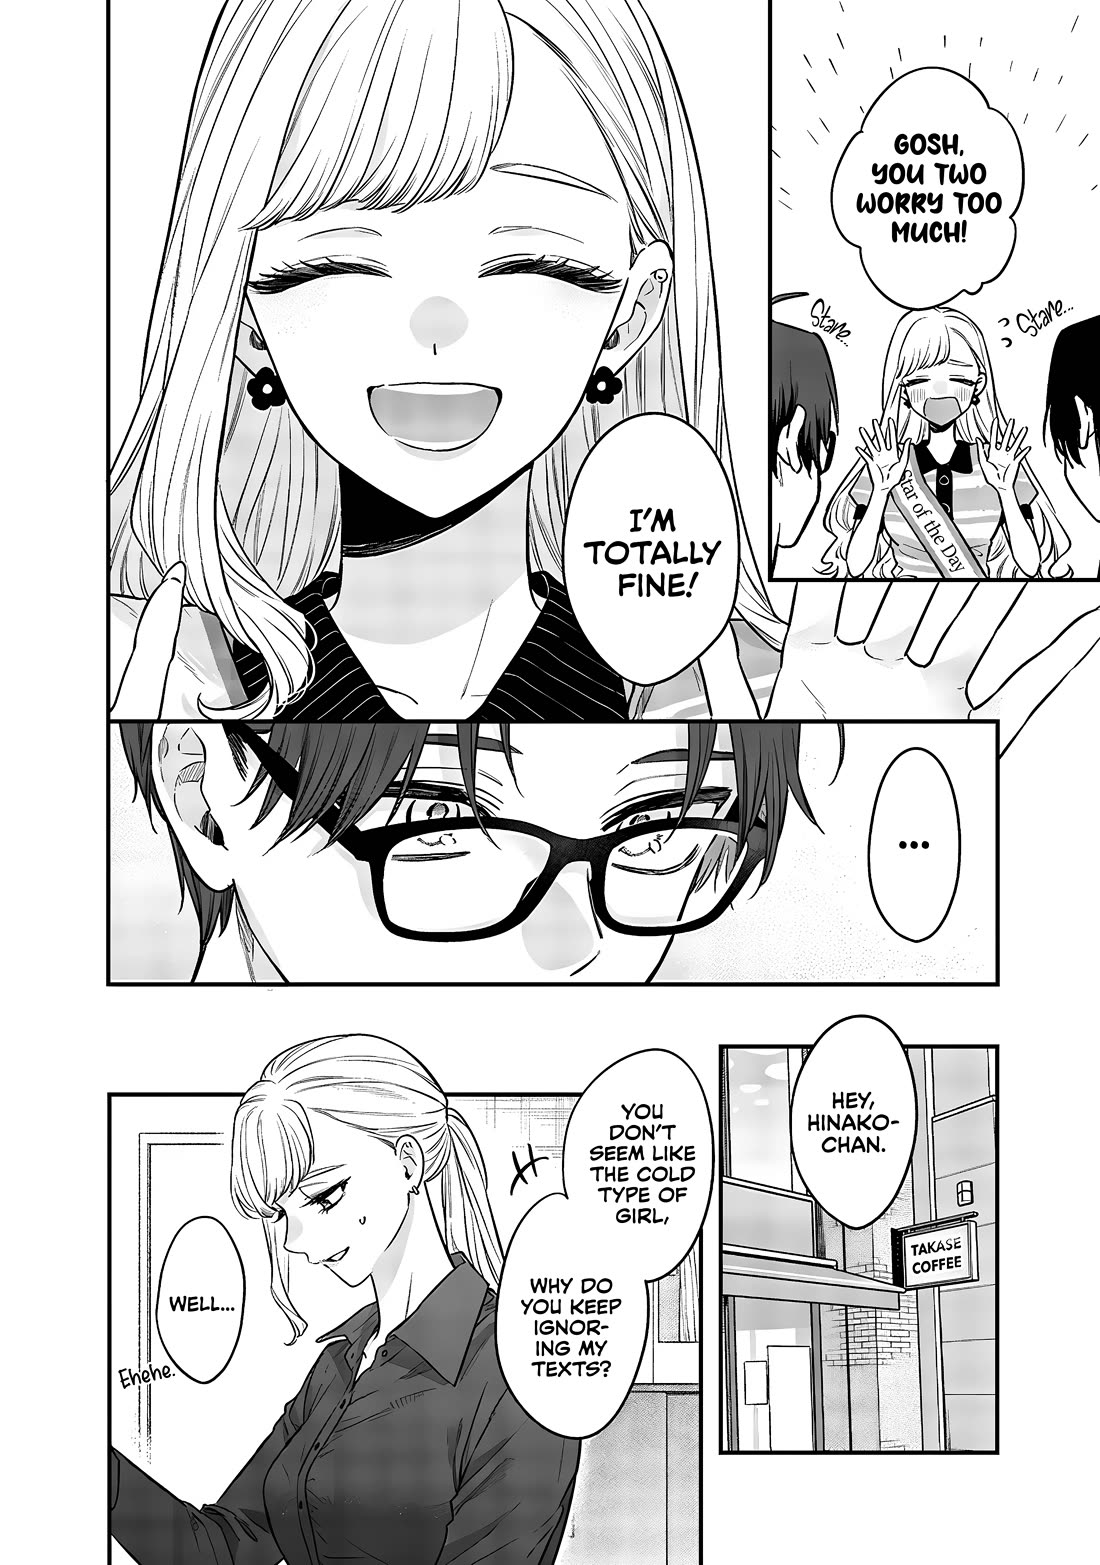 My Older Sister's Friend - chapter 7.5 - #6